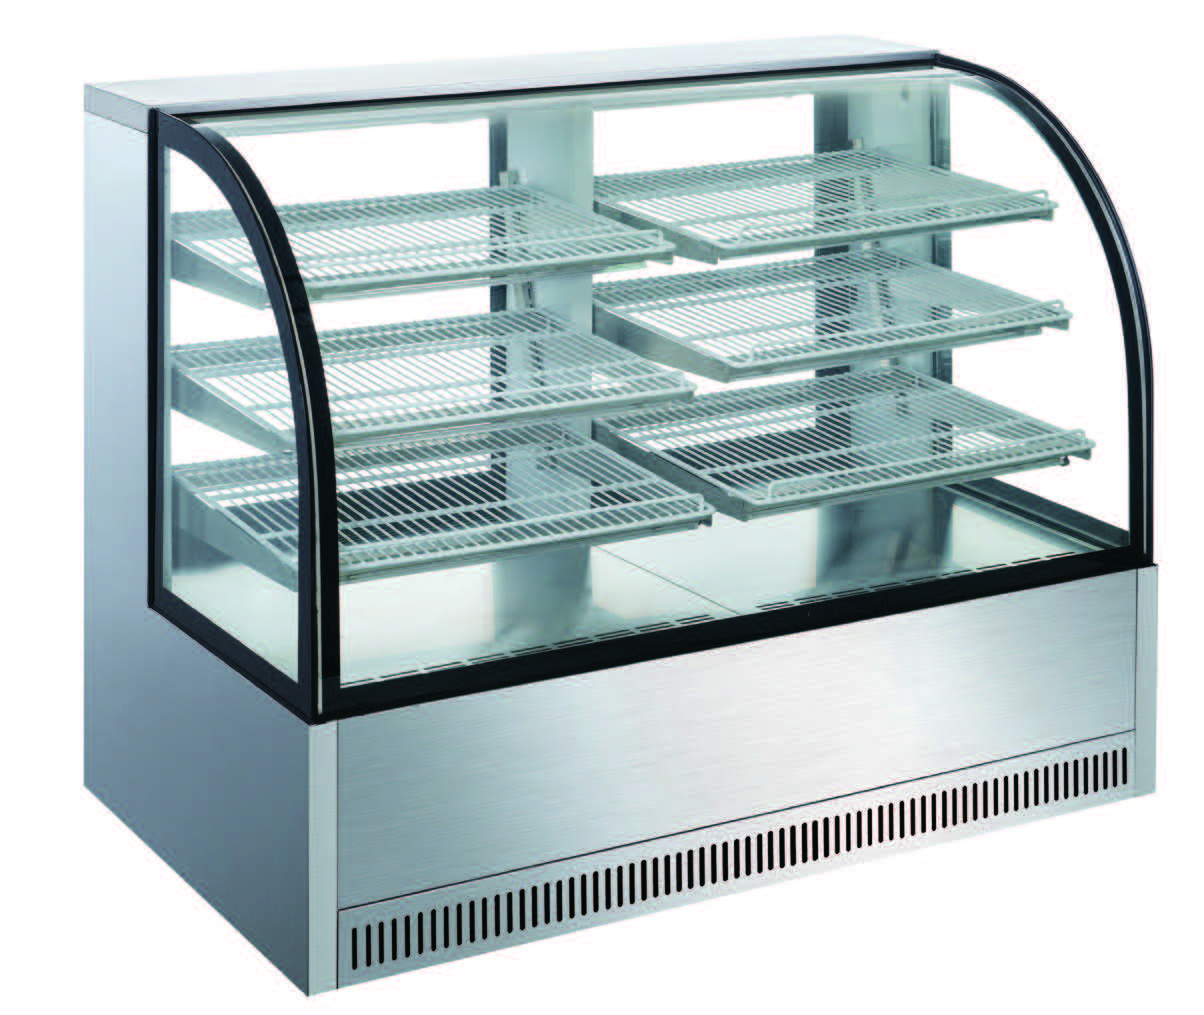 50" Refrigerated Display Case